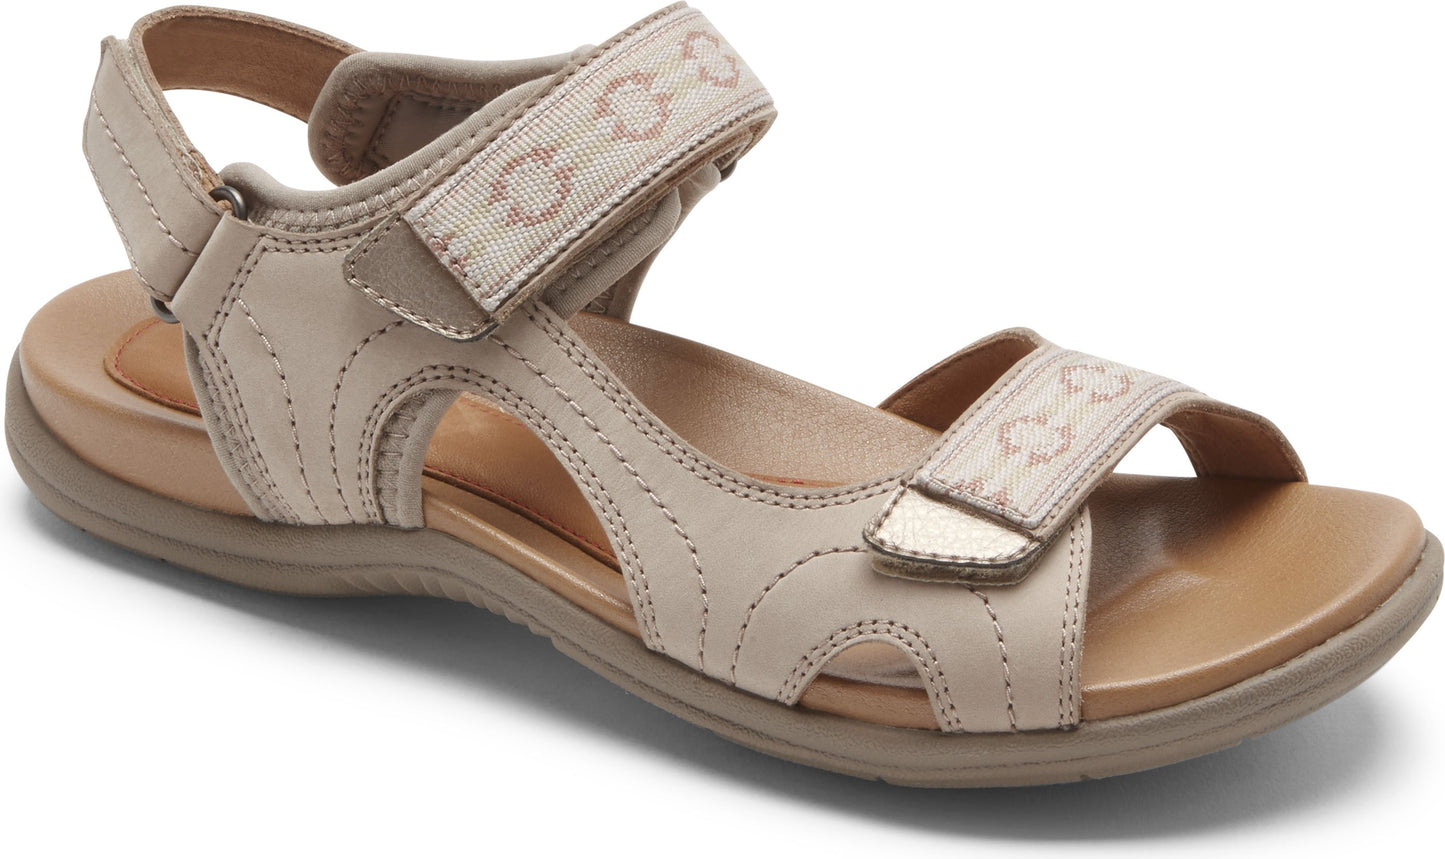 Cobb Hill Sandals Rubey Adjustable Strap Nude